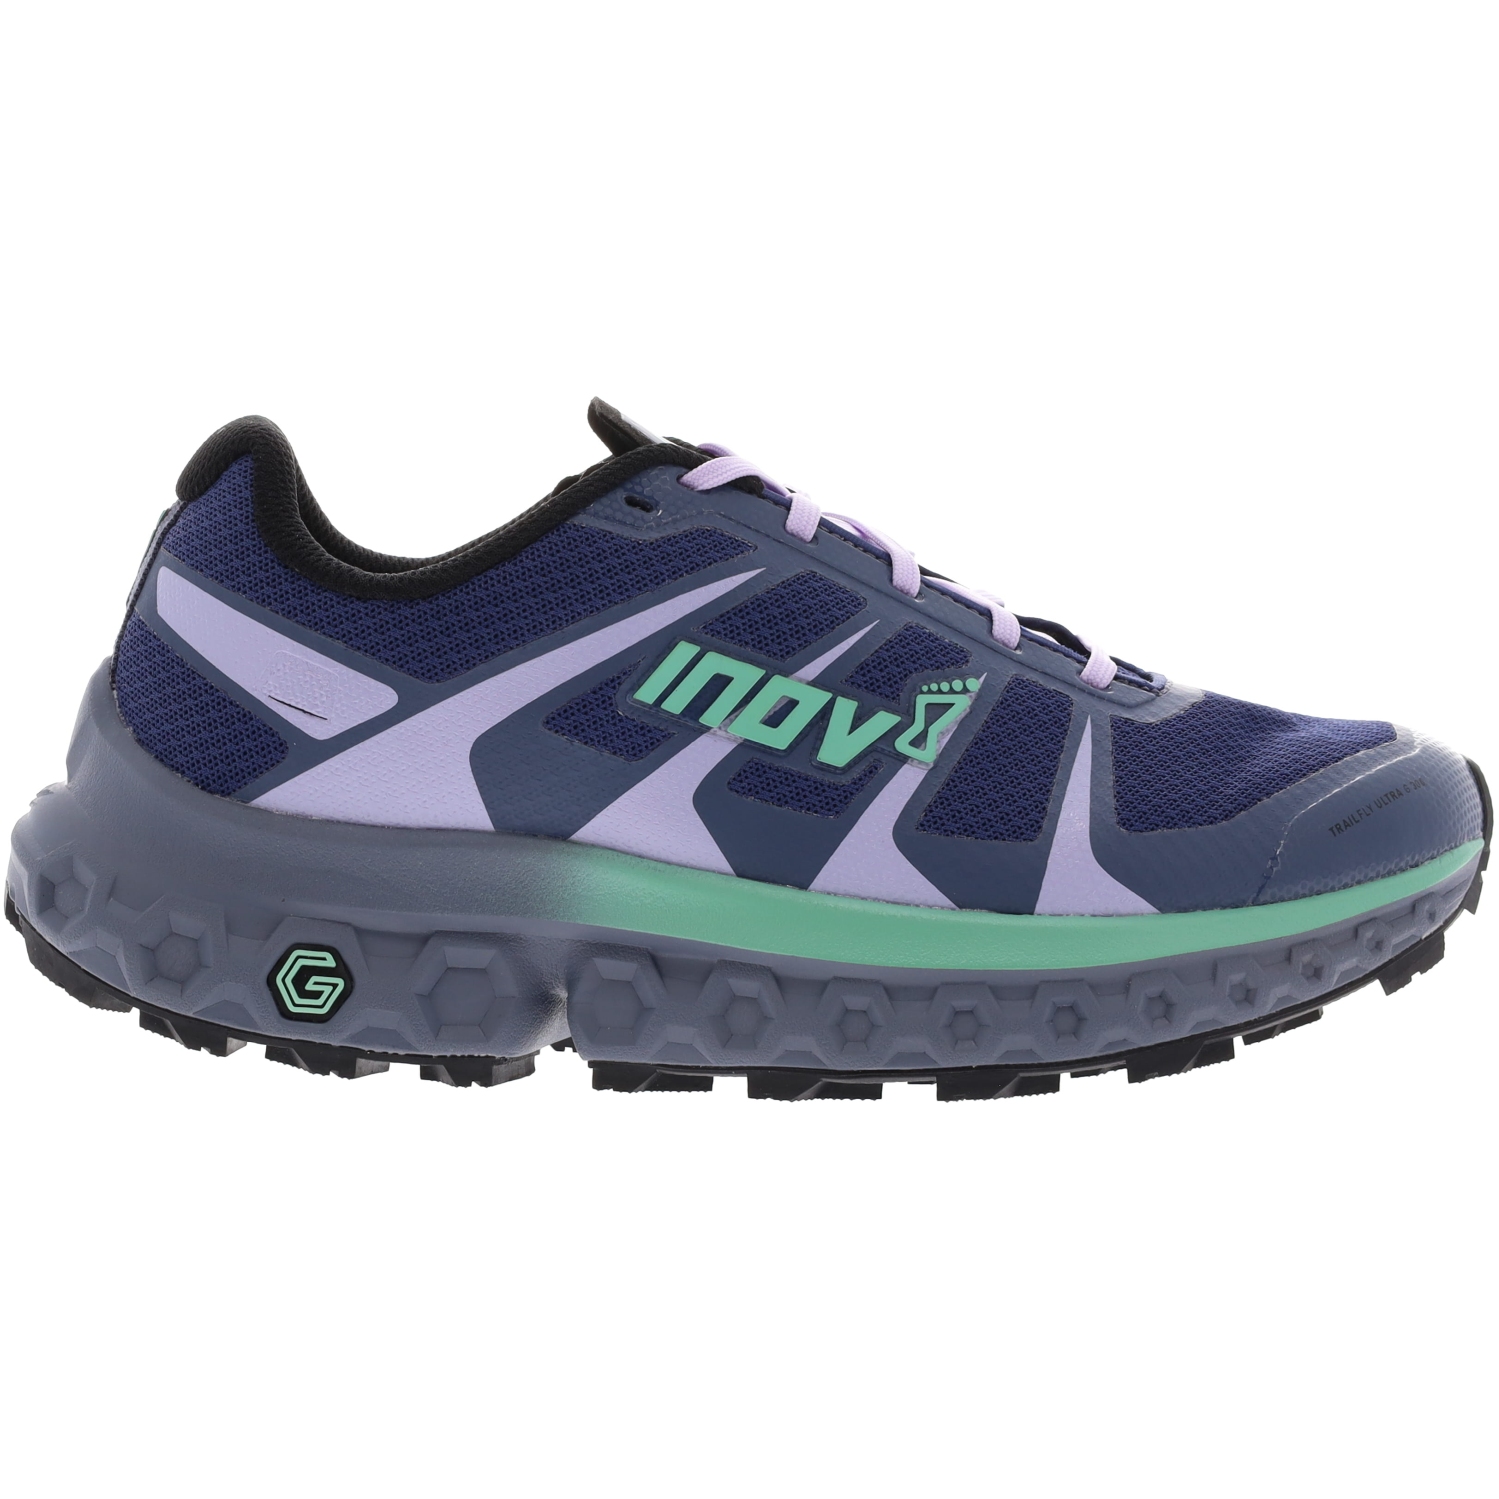 Picture of Inov-8 TrailFly Ultra G 300 Max Wide Women&#039;s Trail Running Shoes - navy/mint/black